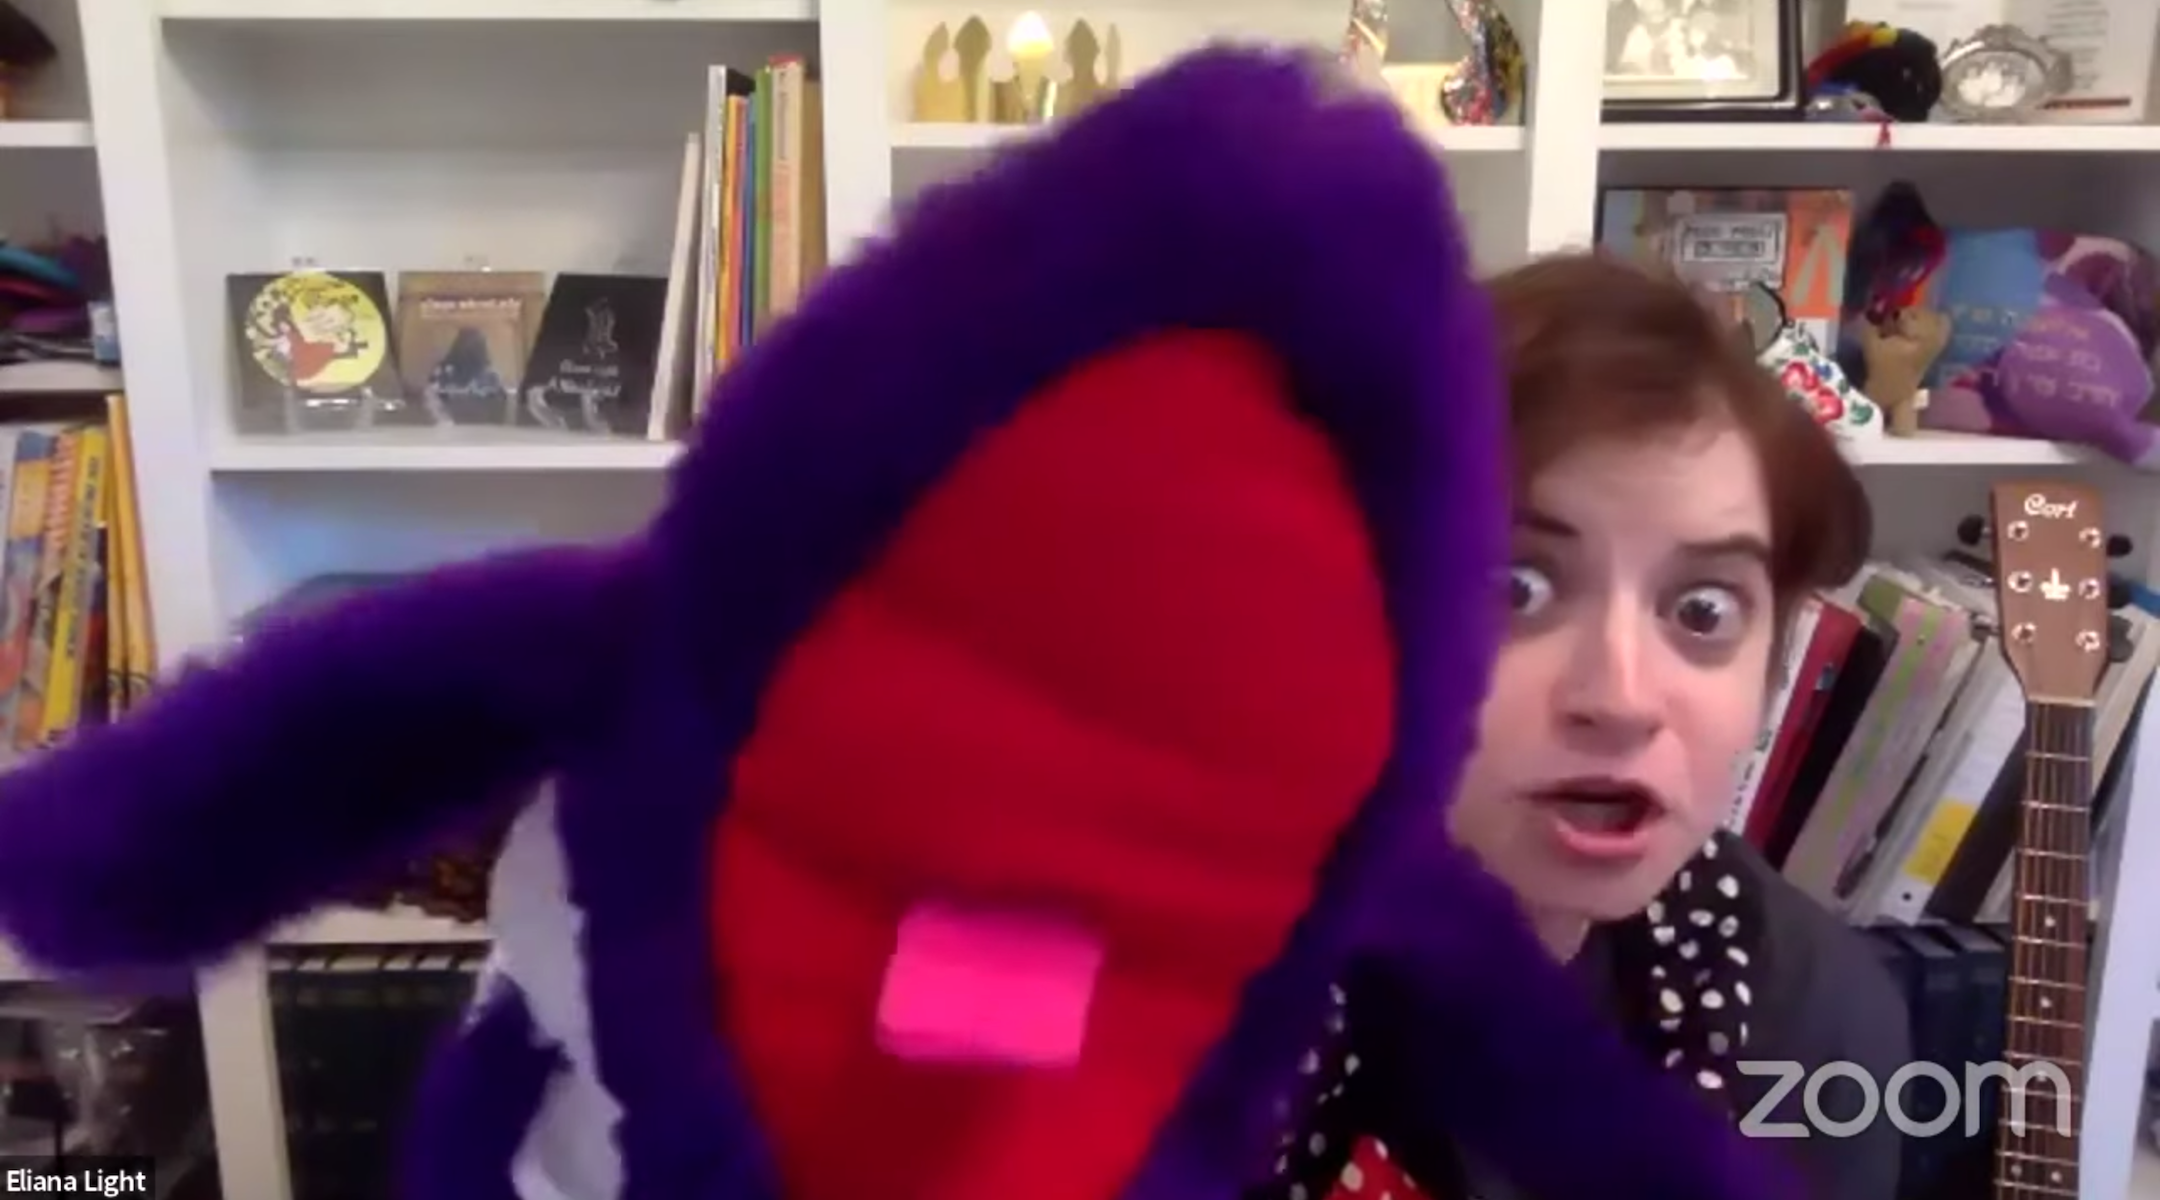 "Eliana Light... And Friends!" is a Jewish children's show that airs weekly on jewishLIVE. (Screenshot from YouTube)